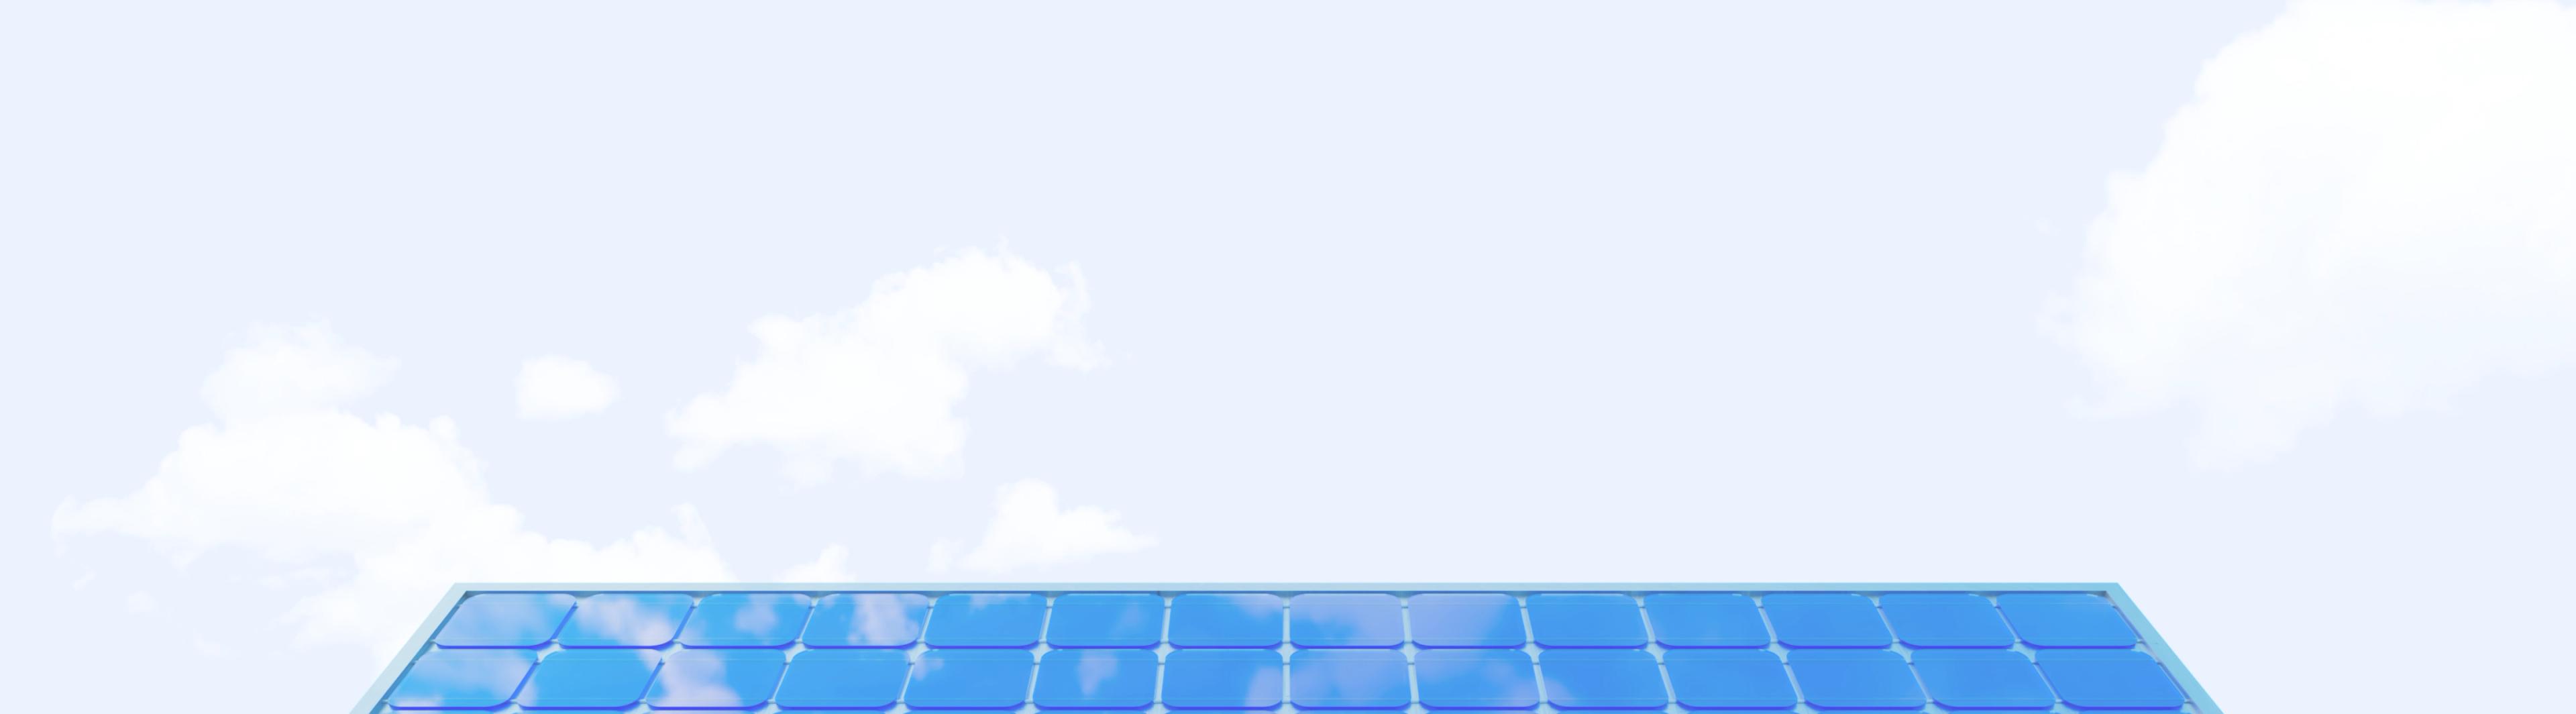 A background image of a light blue sky with a blue solar panel lining the bottom